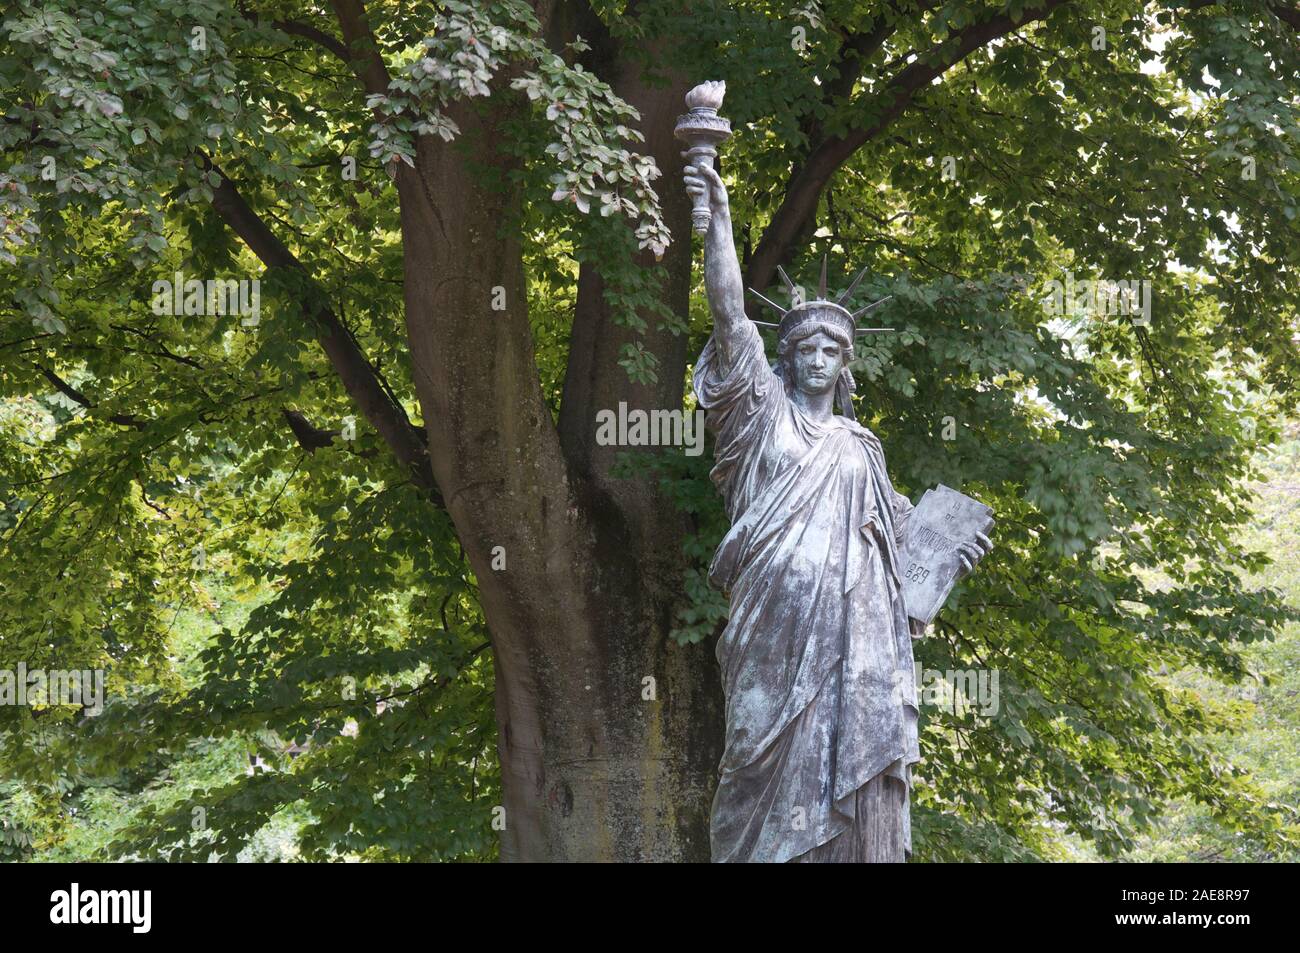 Bronze version of the Statue of Liberty, also known as Liberty Enlightening the World by Frédéric Auguste Bartholdi. Luxembourg Gardens, Paris, France. Stock Photo